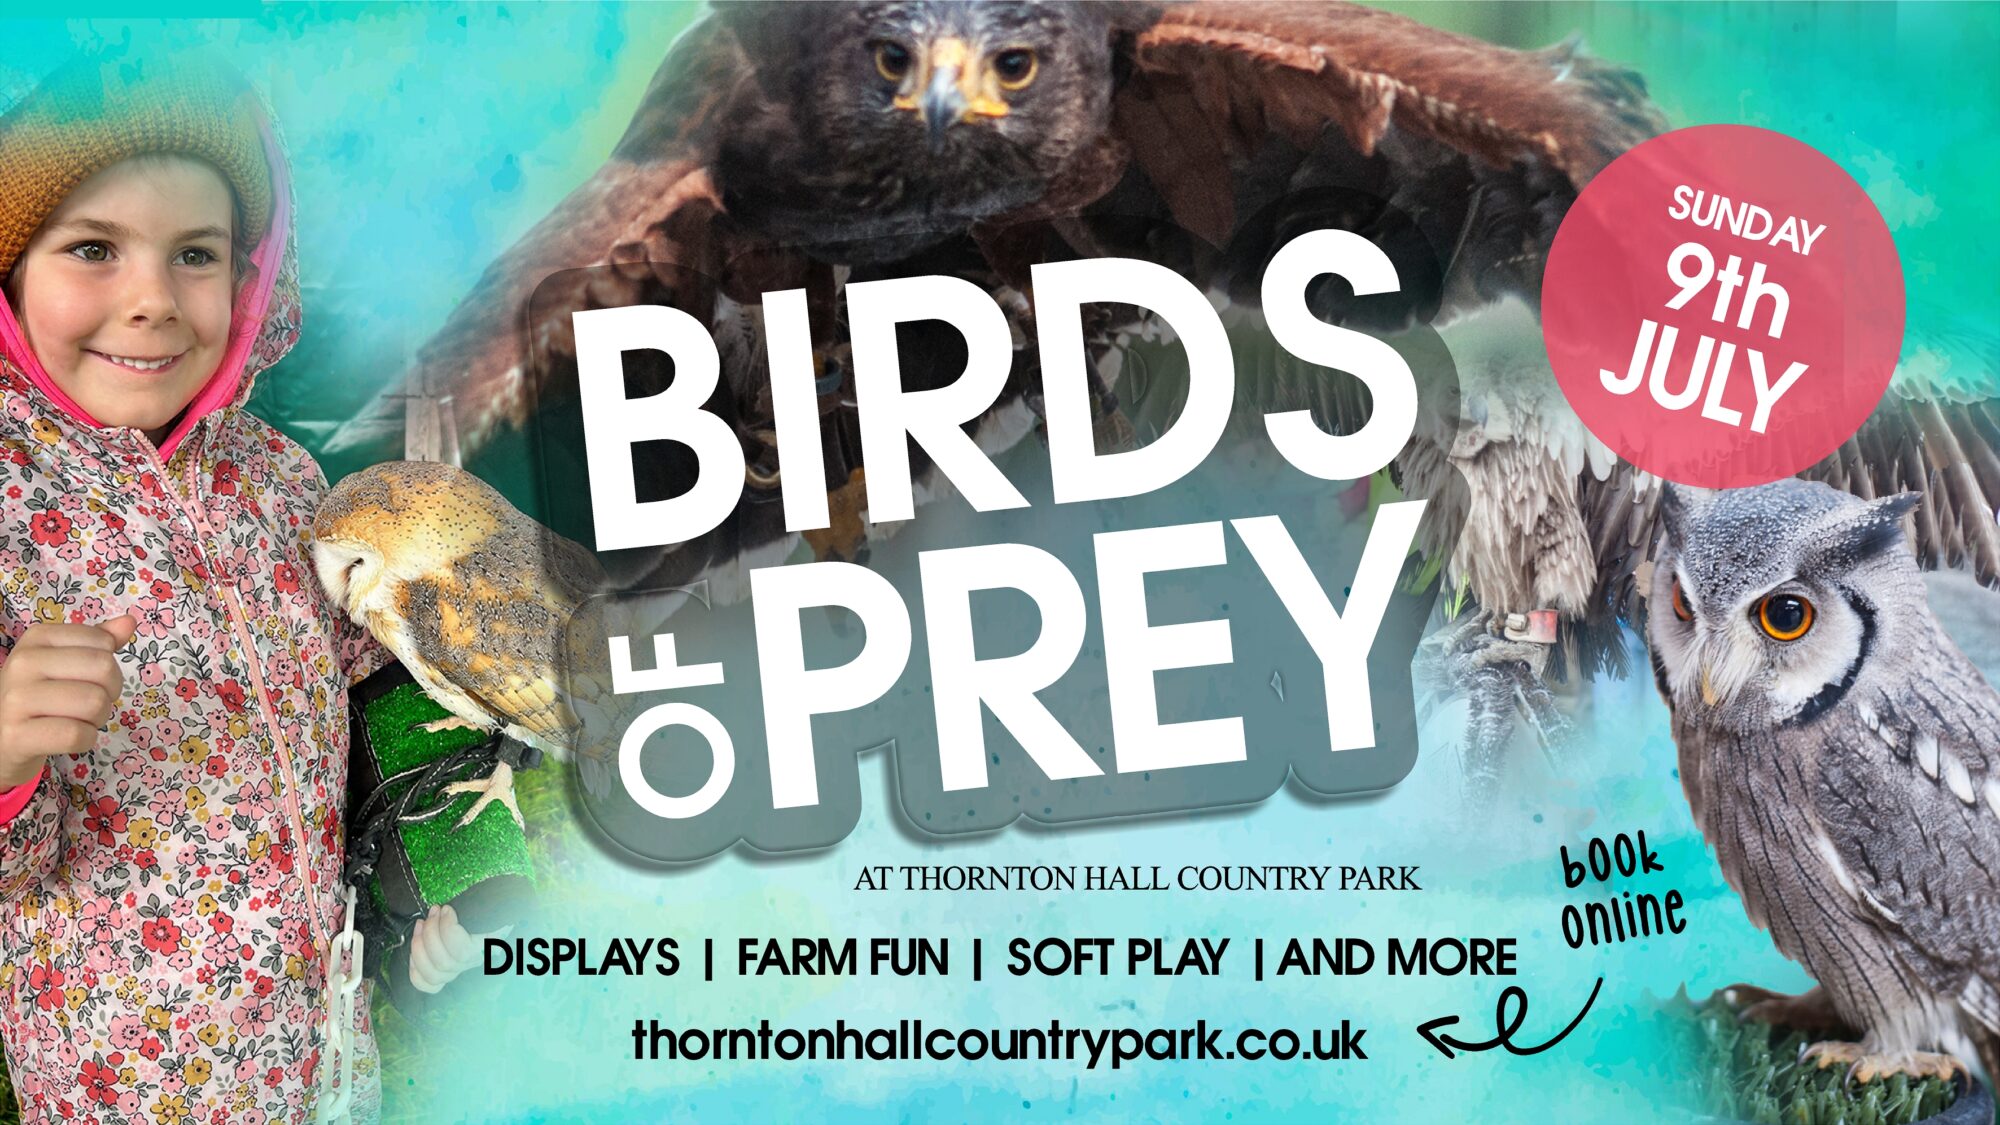 Image name Ticket and FB Graphic Rectangular 1 the 2 image from the post BIRDS OF PREY at Thornton Hall Country Park in Yorkshire.com.